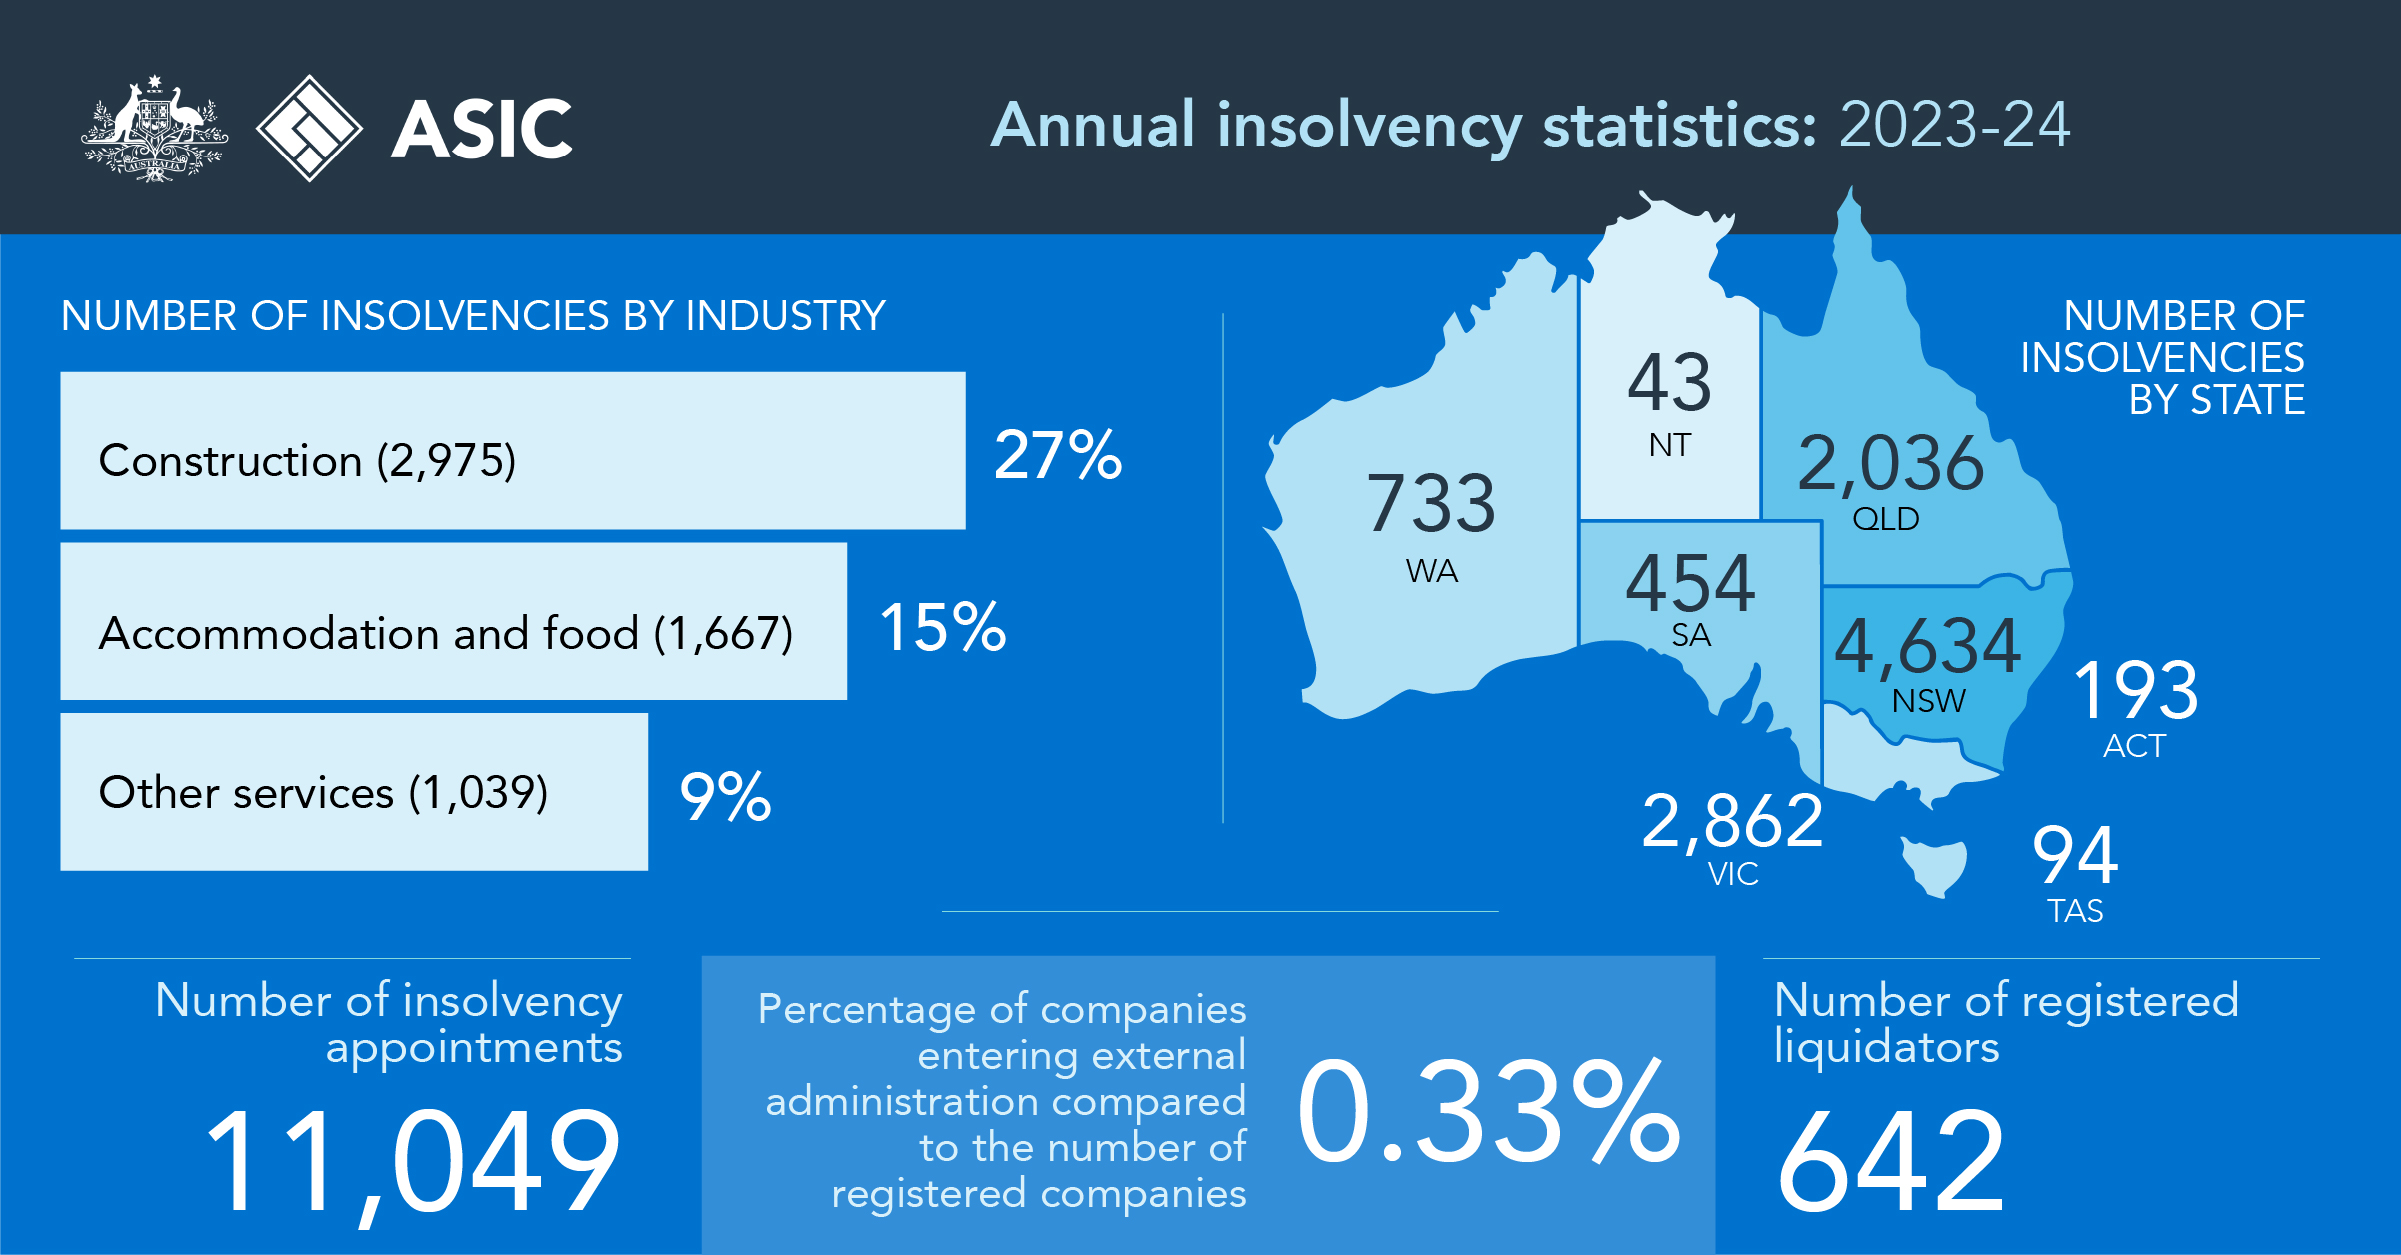 Annual insolvency statistics: 2023-24 - text version below